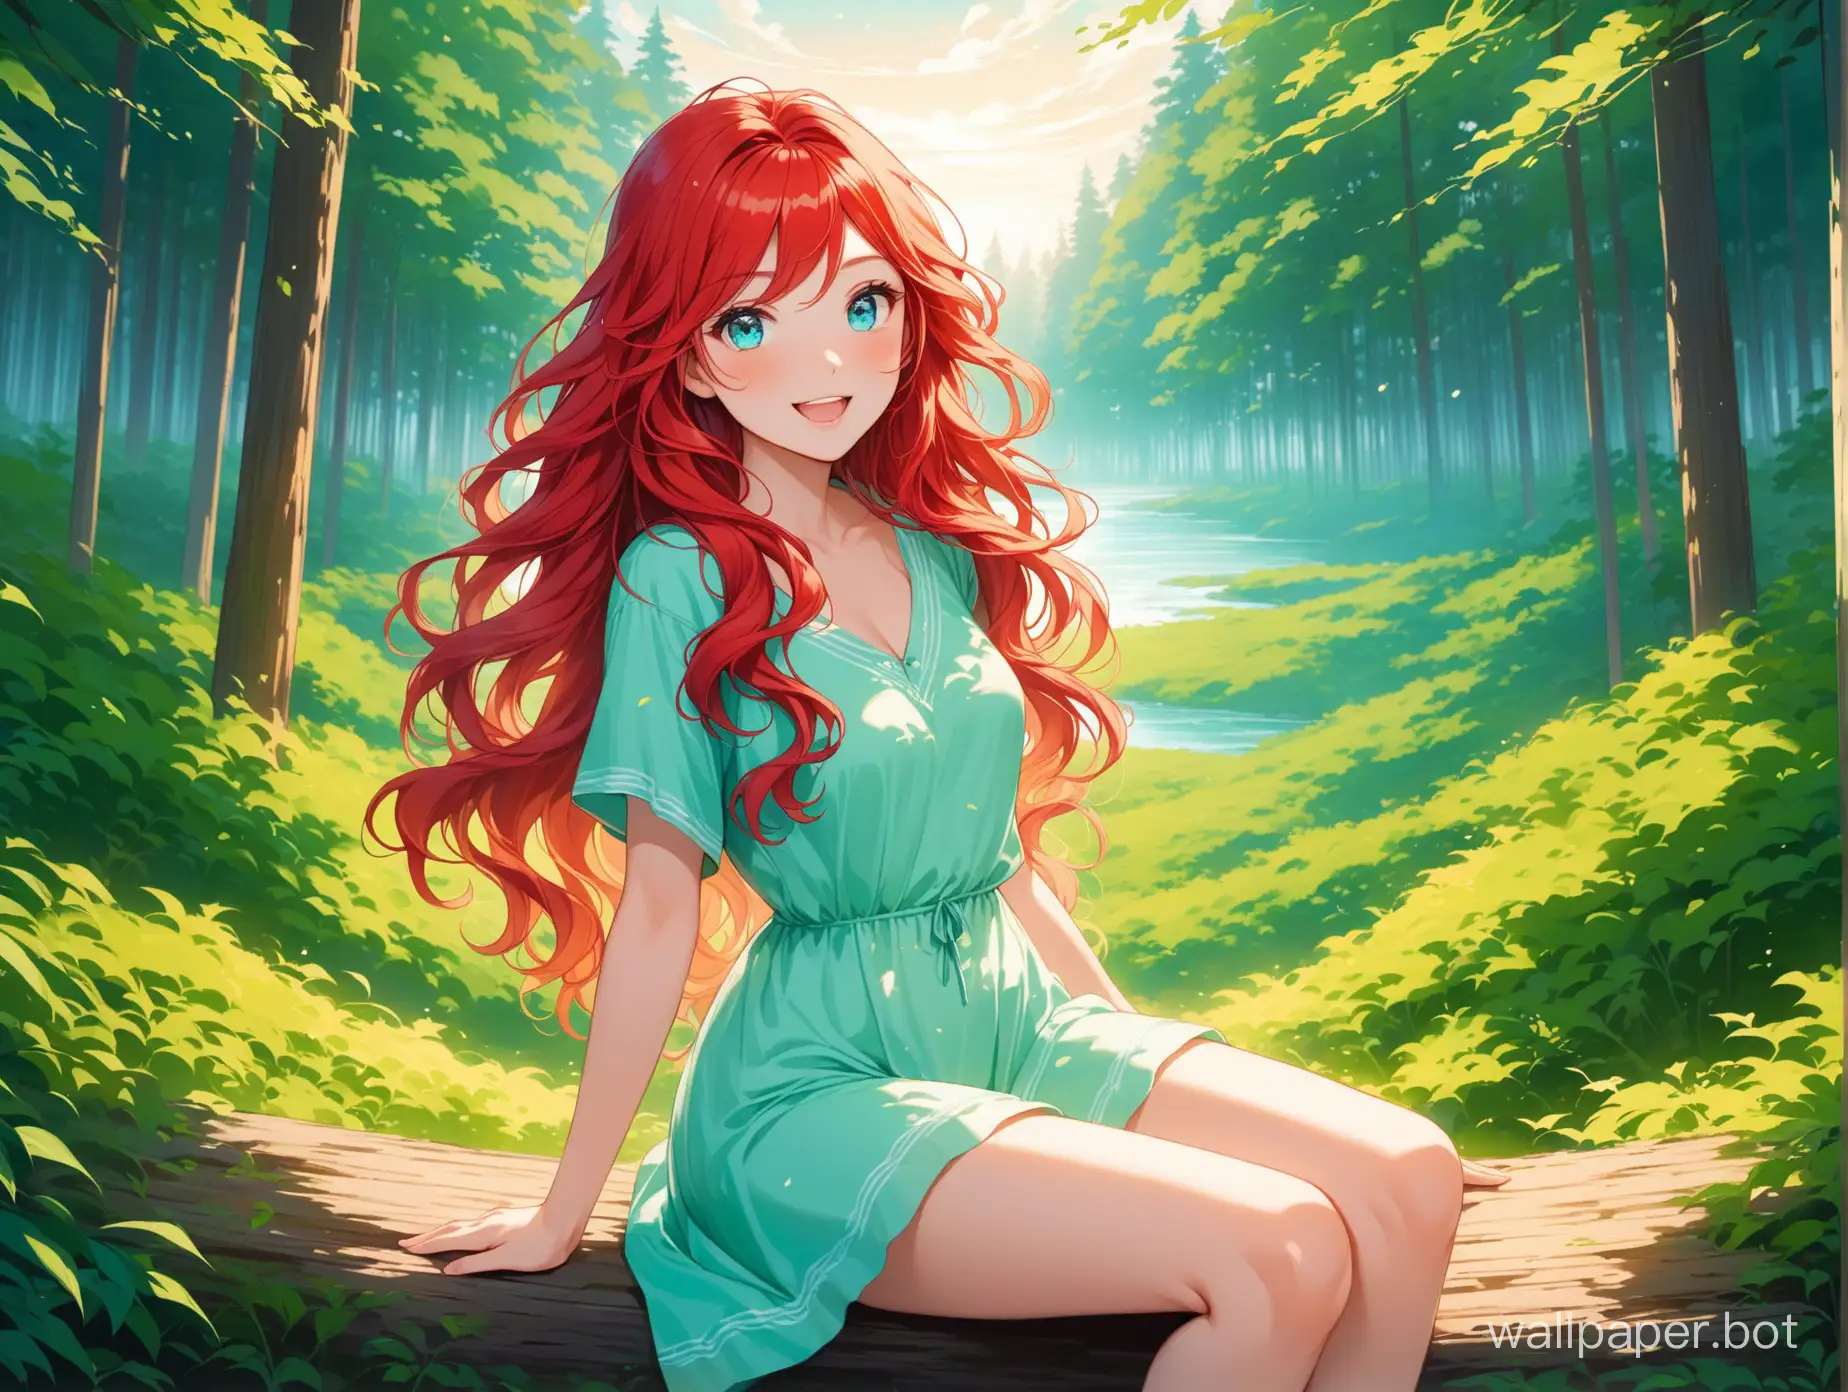 Sole-RedHaired-Girl-with-Wavy-Hair-Amidst-Serene-Forest-Horizon